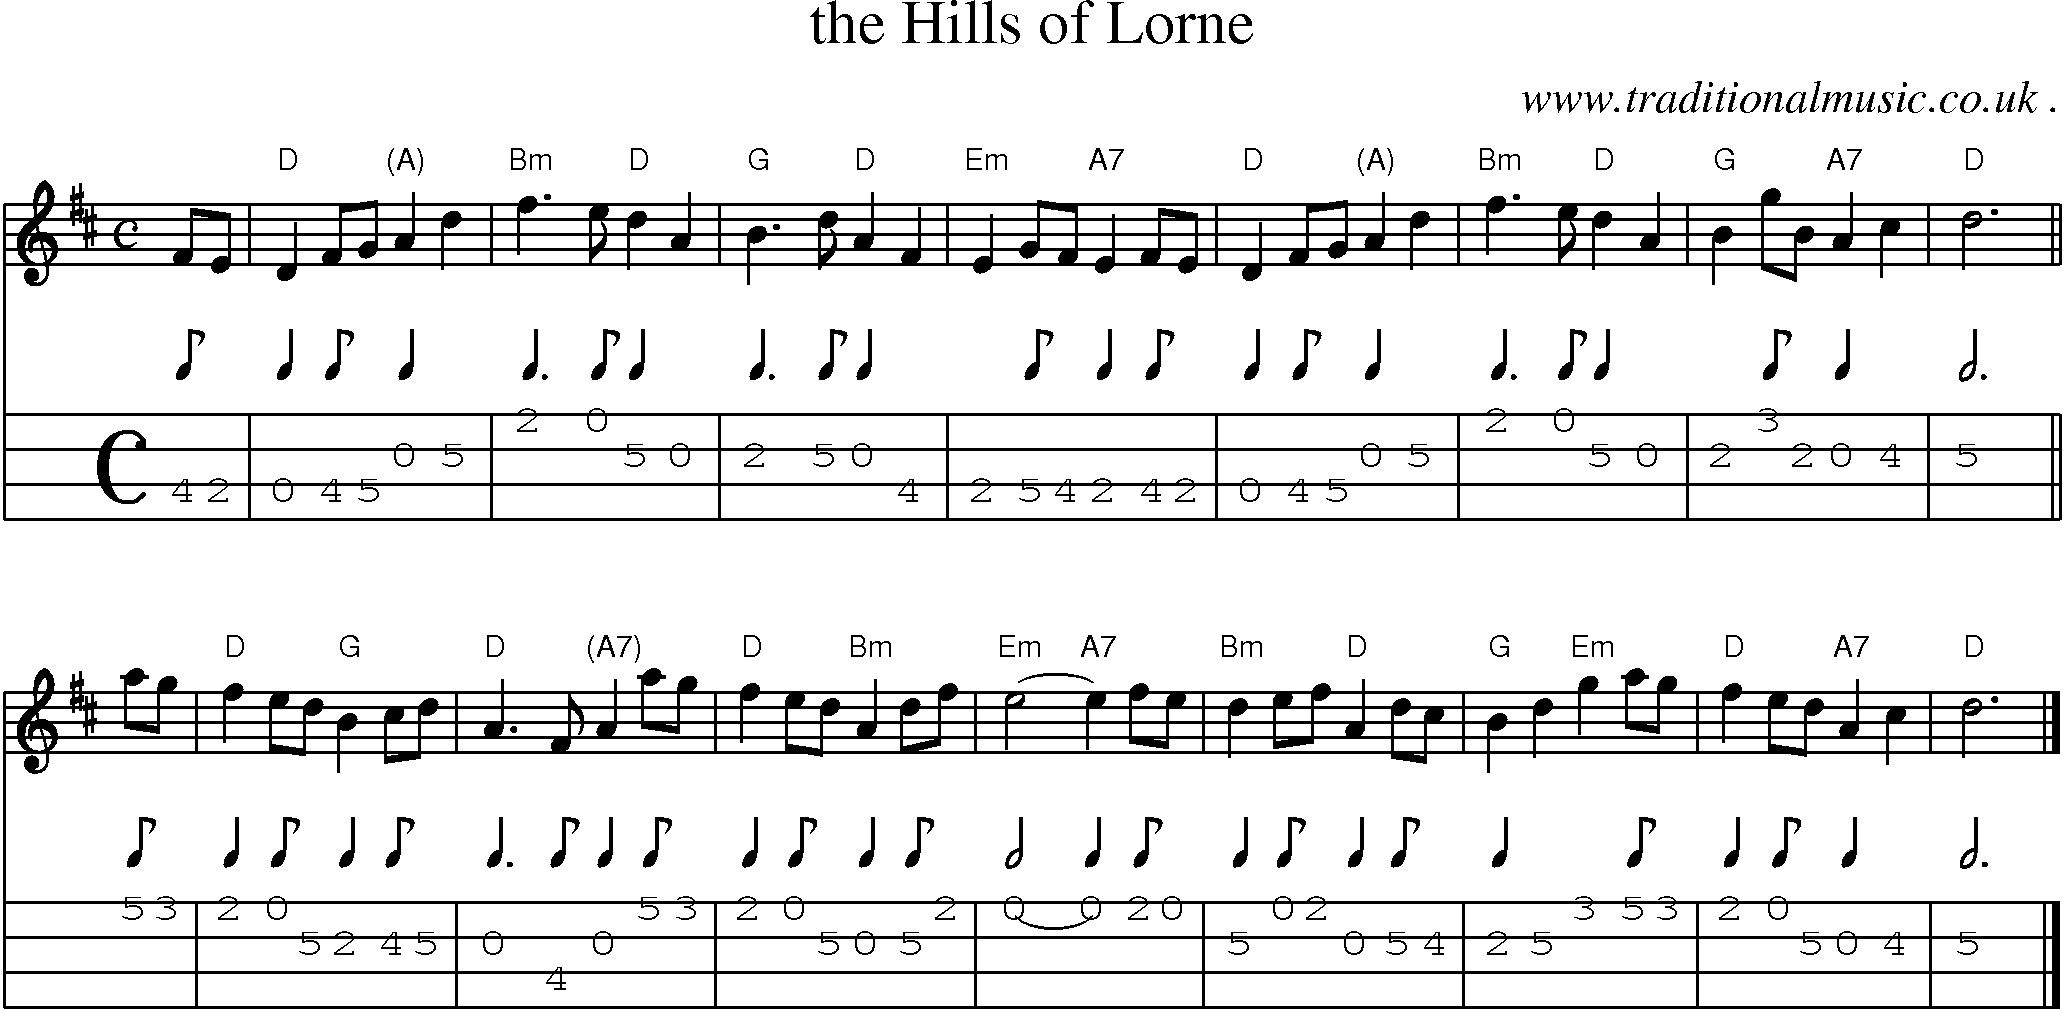 Sheet-music  score, Chords and Mandolin Tabs for The Hills Of Lorne